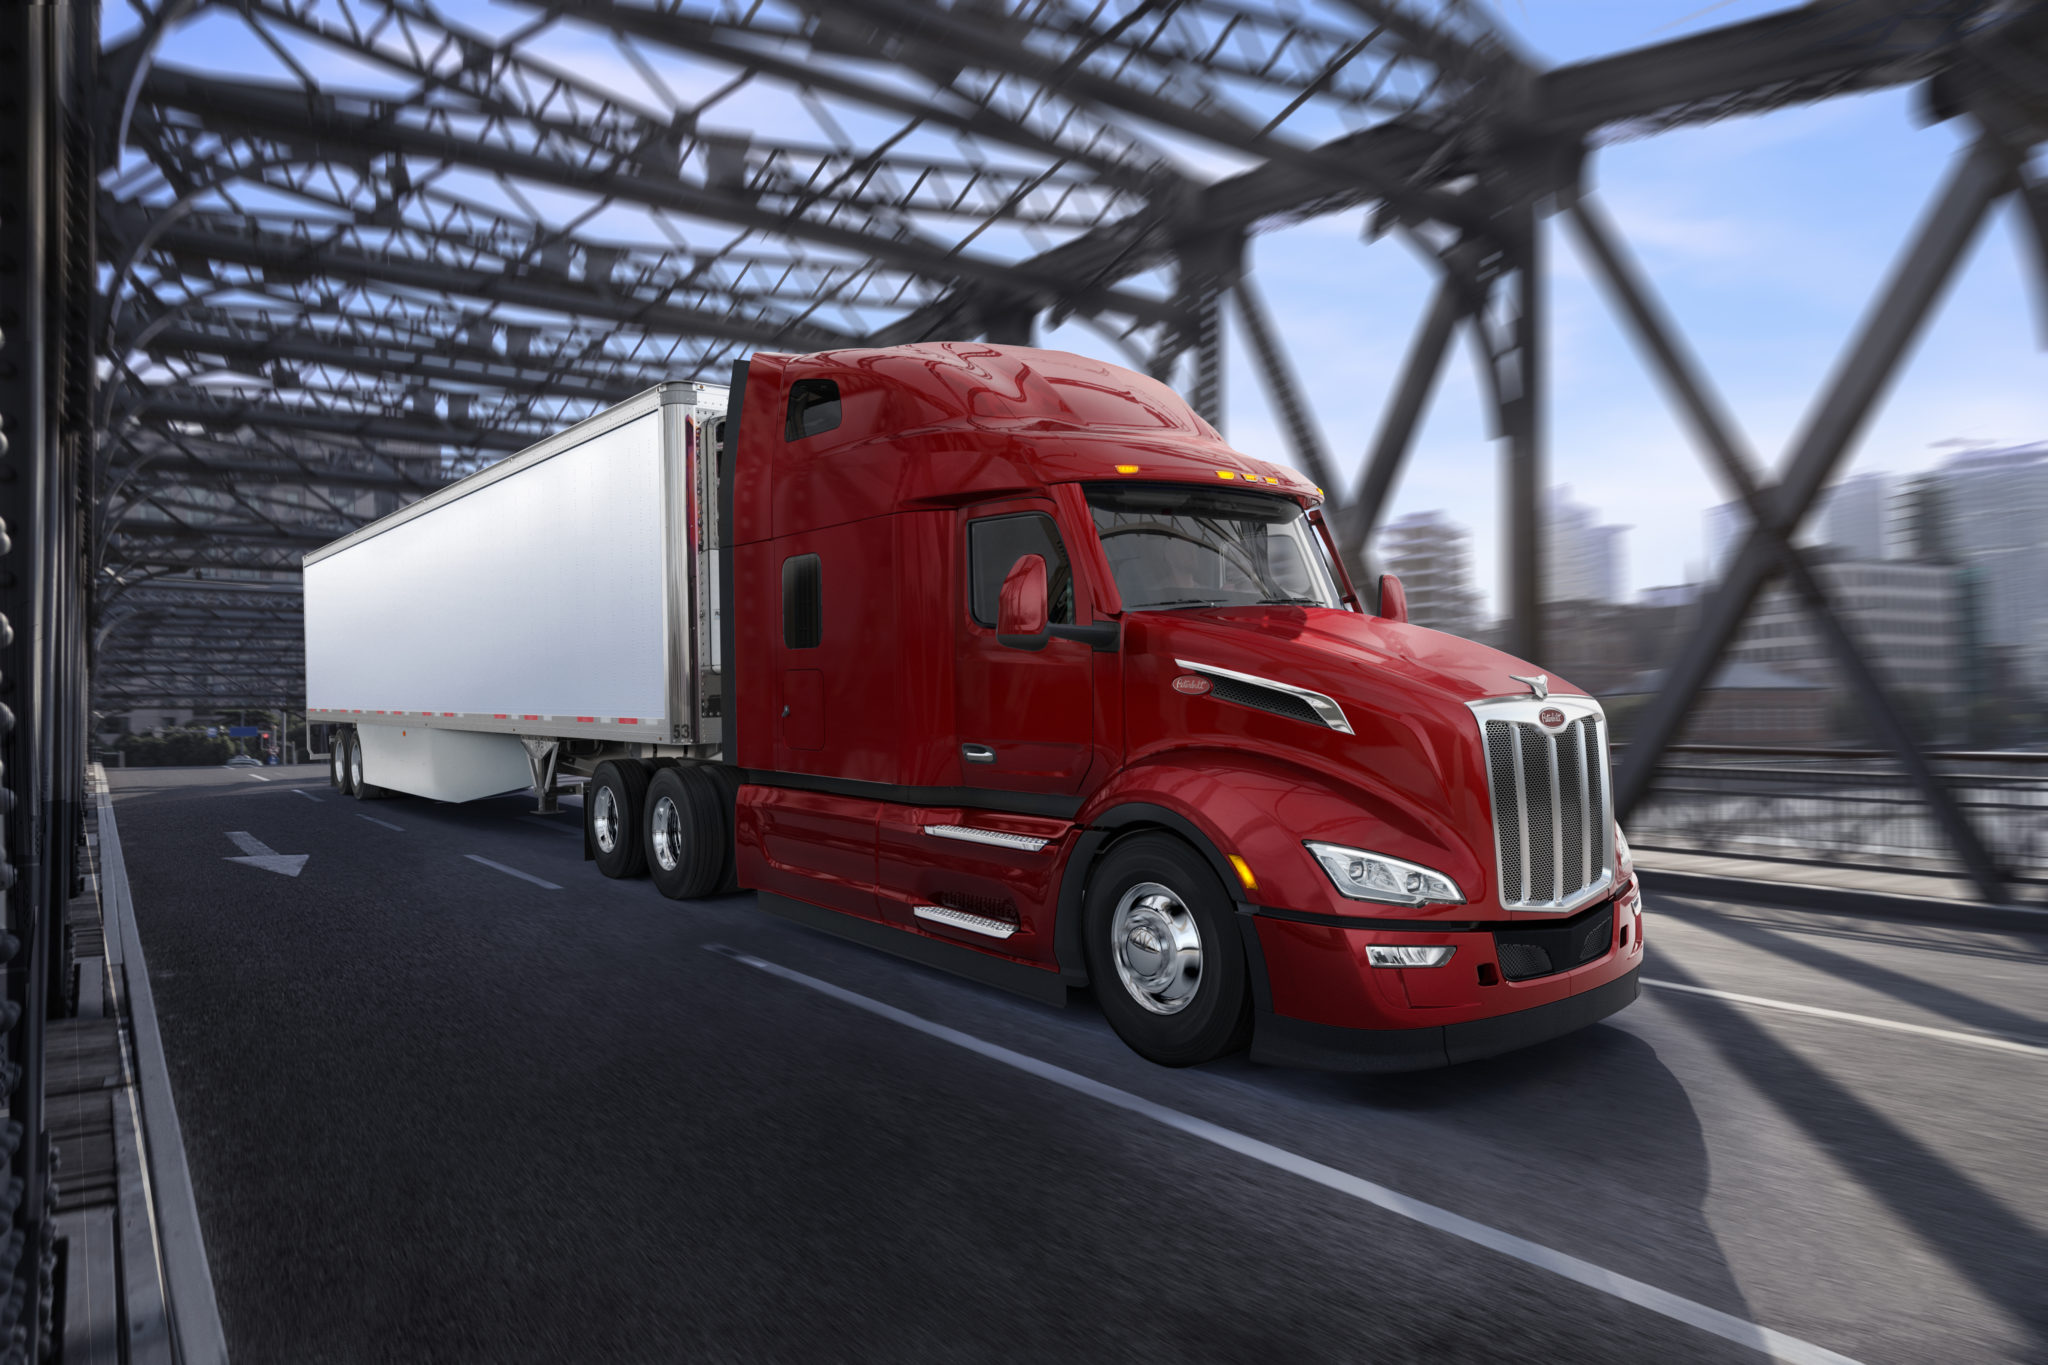 Redesigned Model 579 is 'the most reliable truck ever designed by Peterbilt,' company says